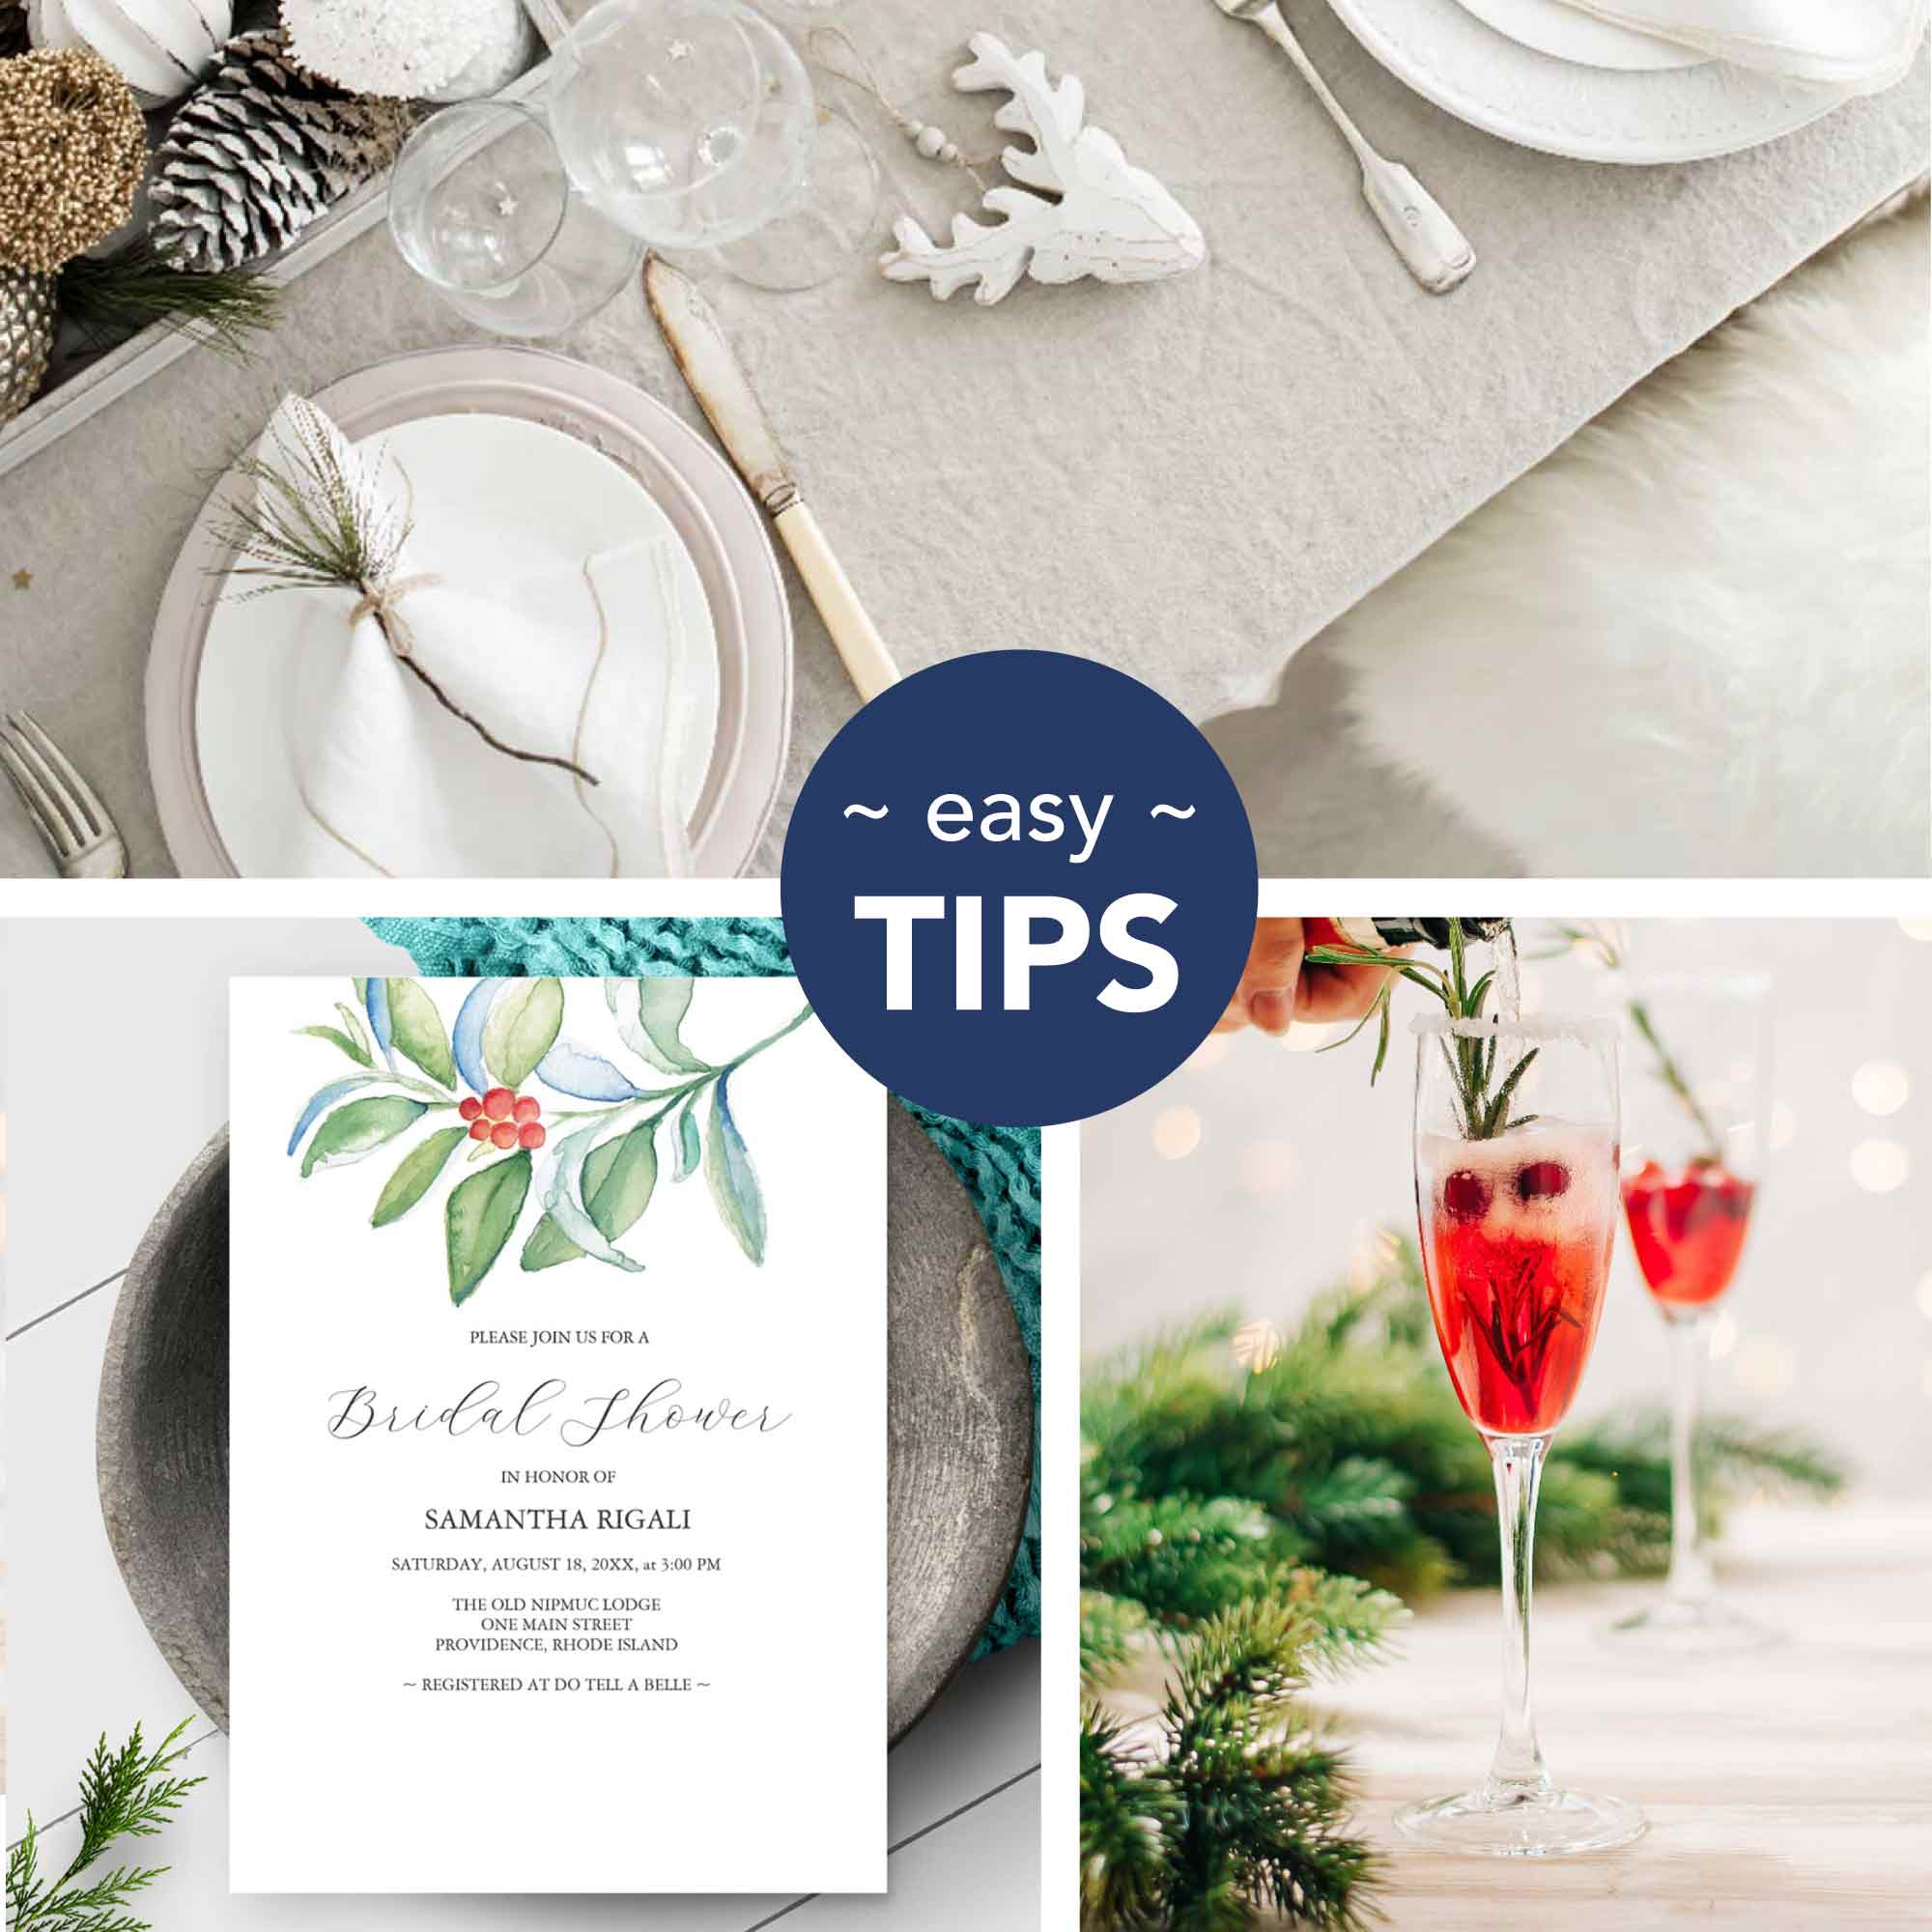 Winter bridal shower ideas. Click to learn more.